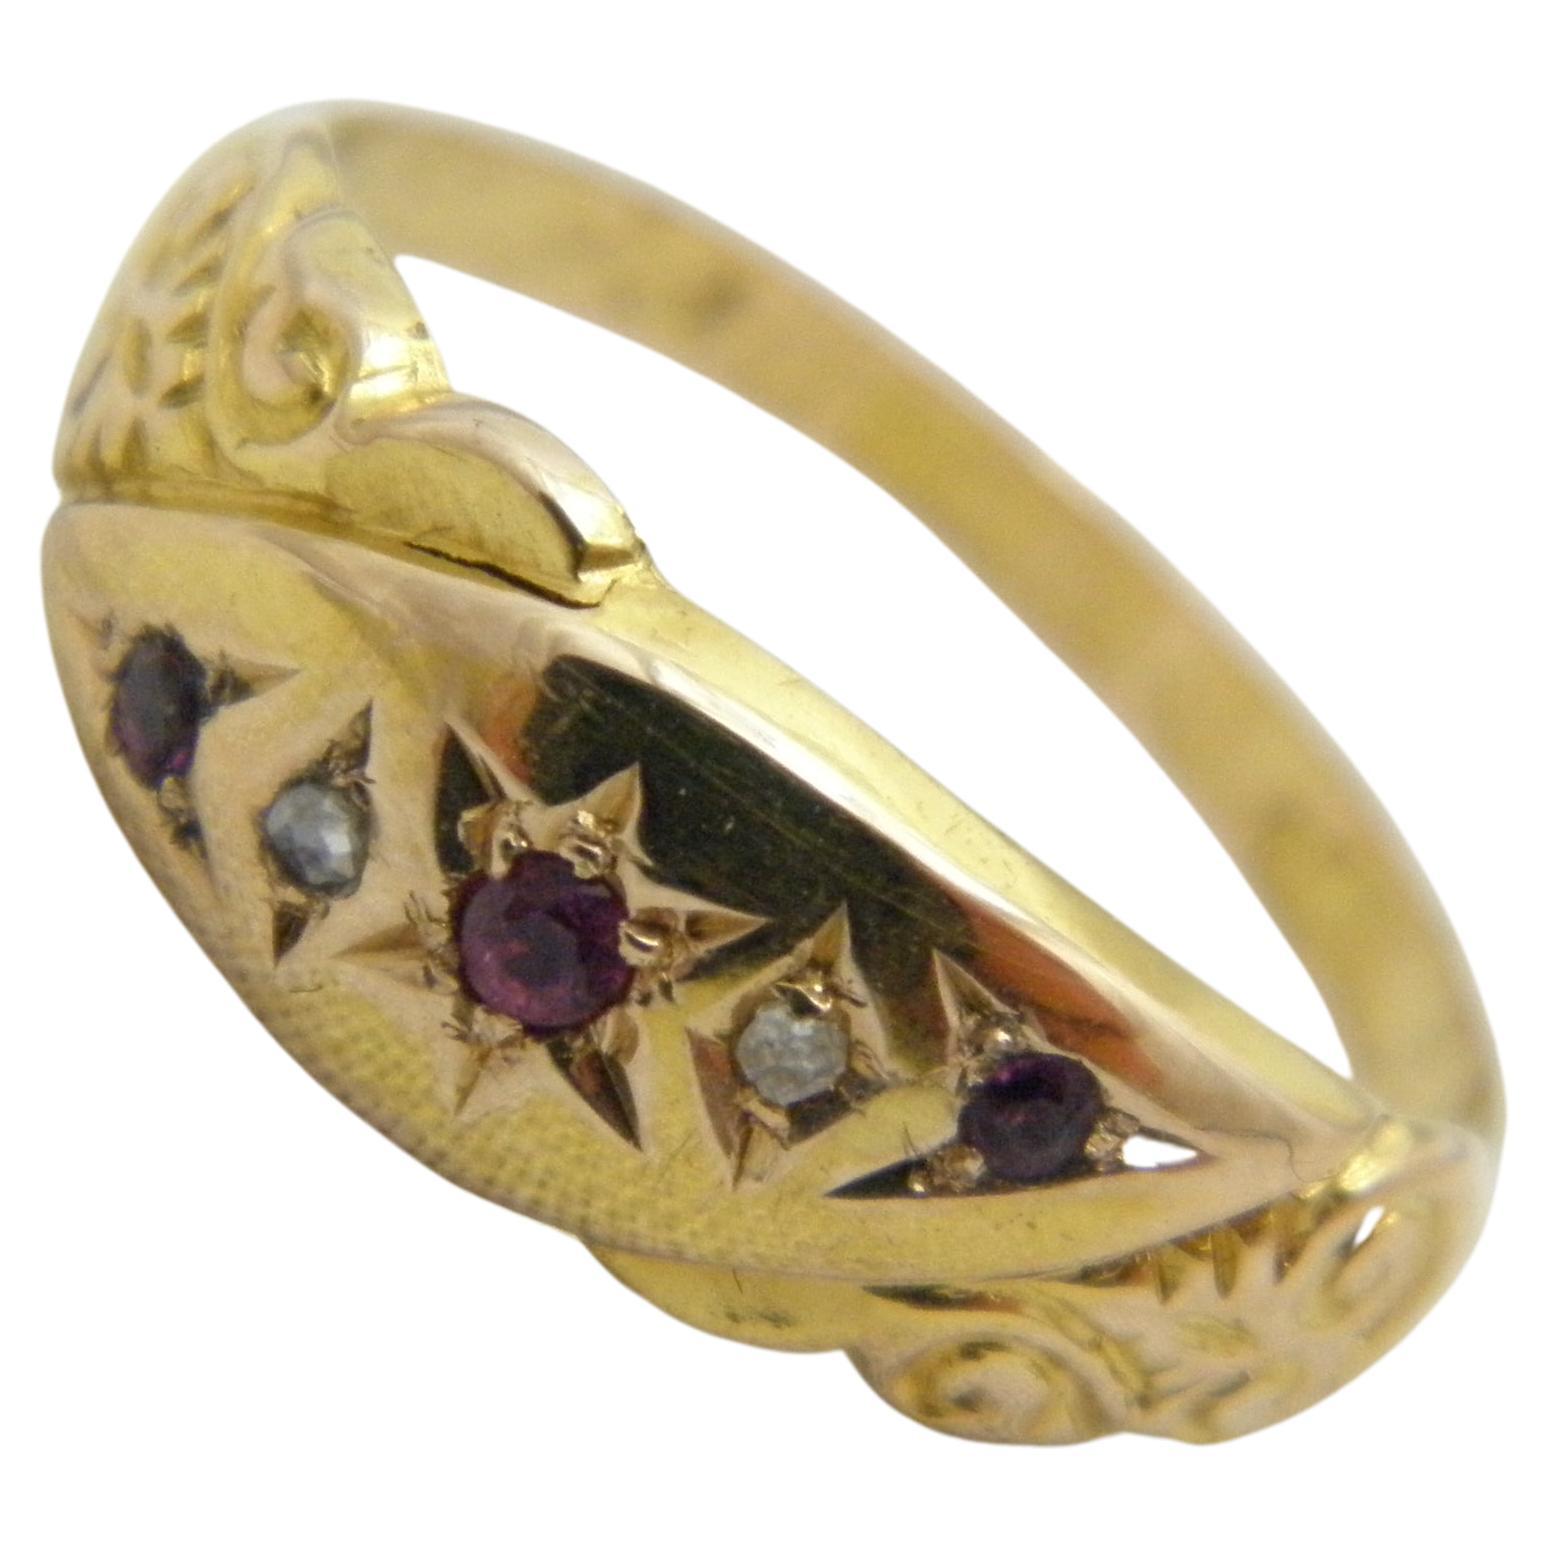 Antique 15ct Gold Ruby Diamond Gypsy Boat Ring Size O 7.25 625 Chester 1910 For Sale